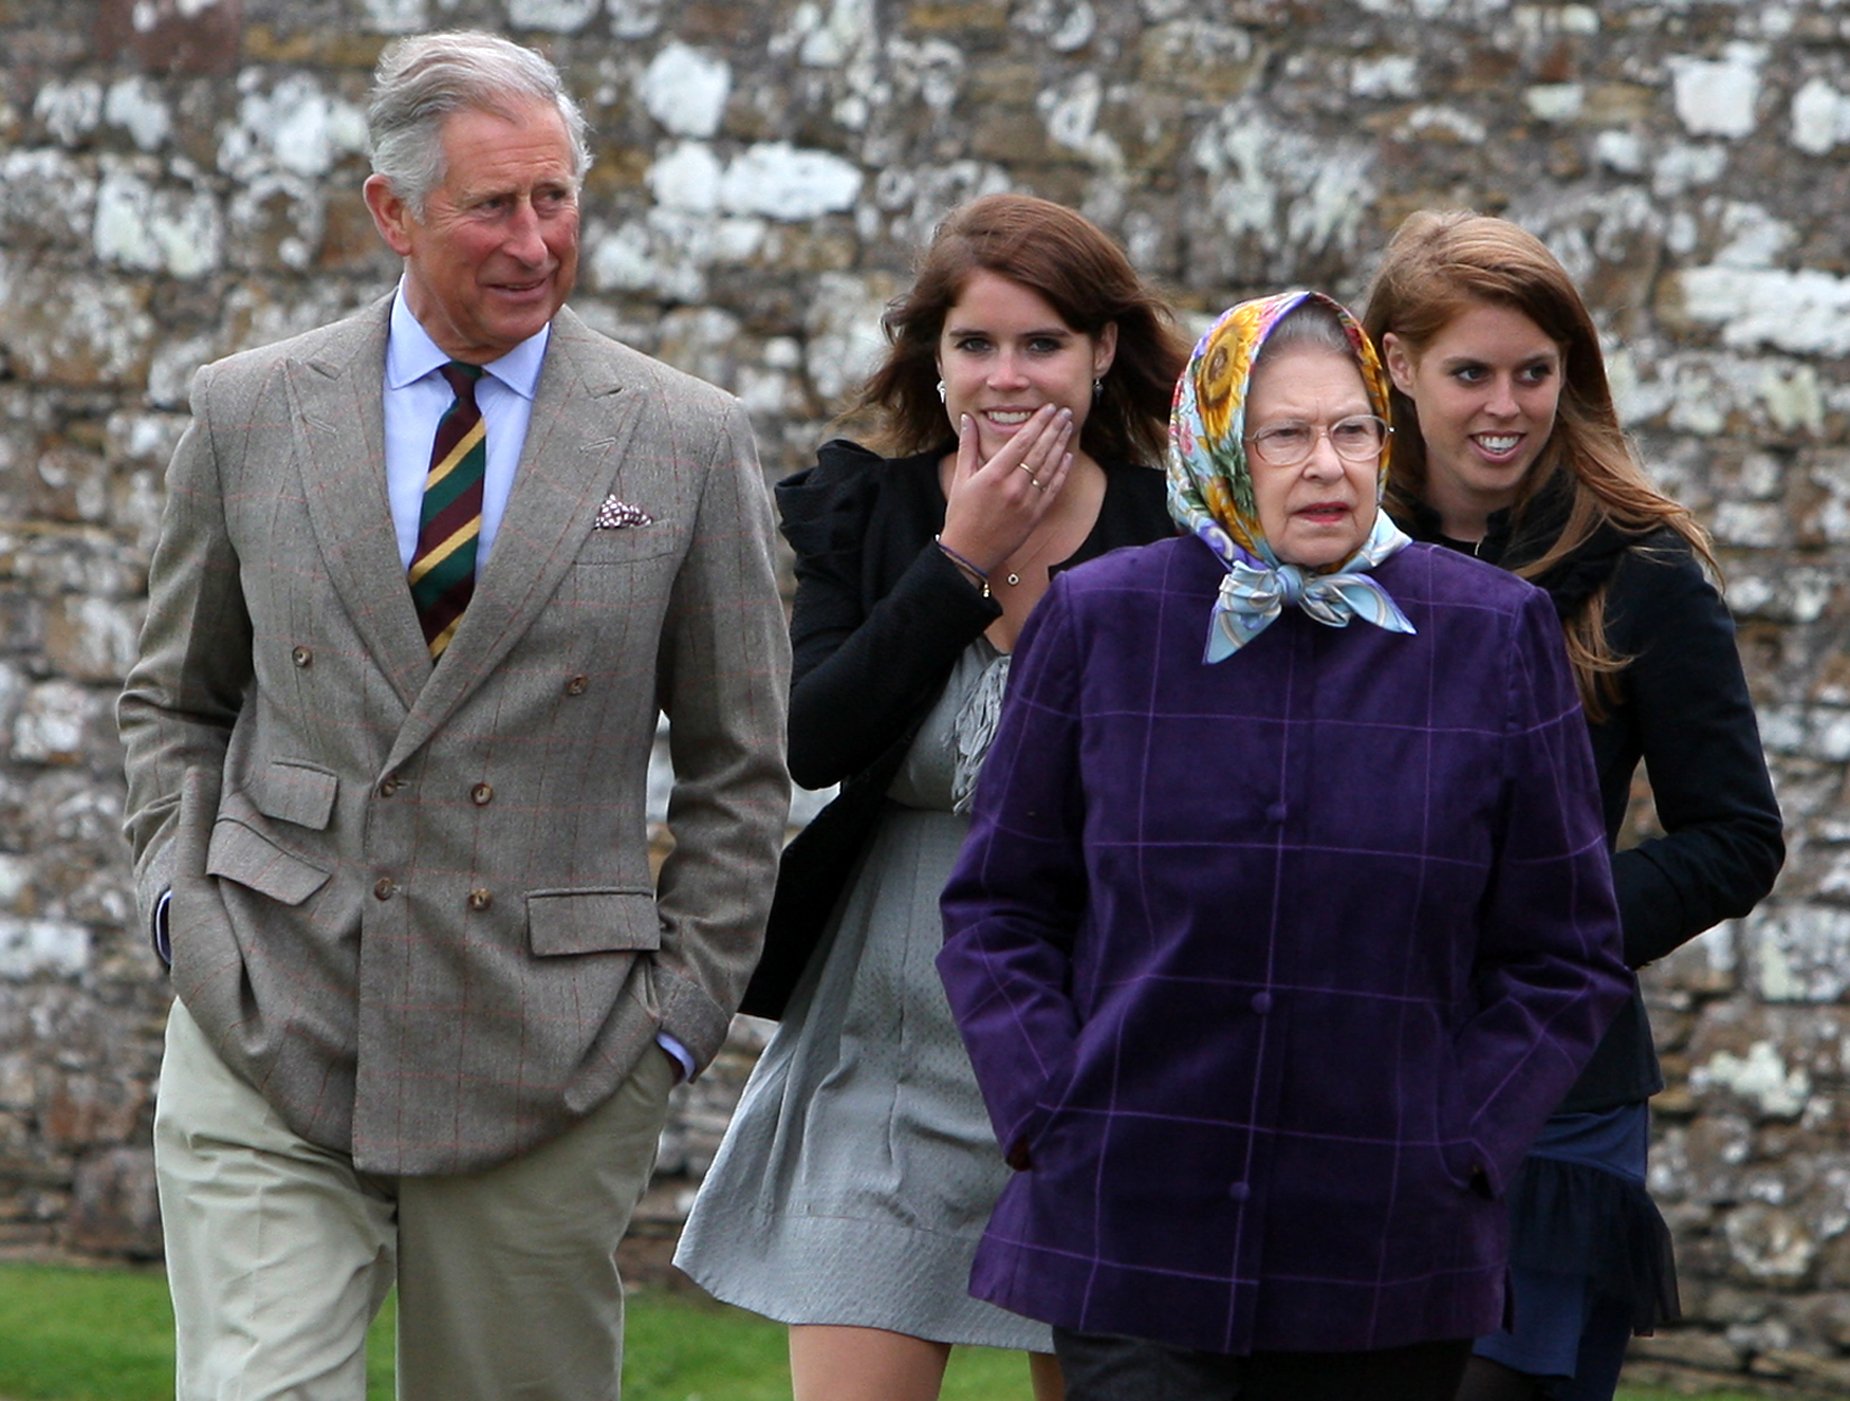 Prince Charles, Queen Elizabeth II, Princess Eugenie, and Princess Beatrice at the Castle of Mey after a private family holiday around the Western Isles of Scotland, on August 2, 2010, in Scrabster, Scotland | Source: Getty Images